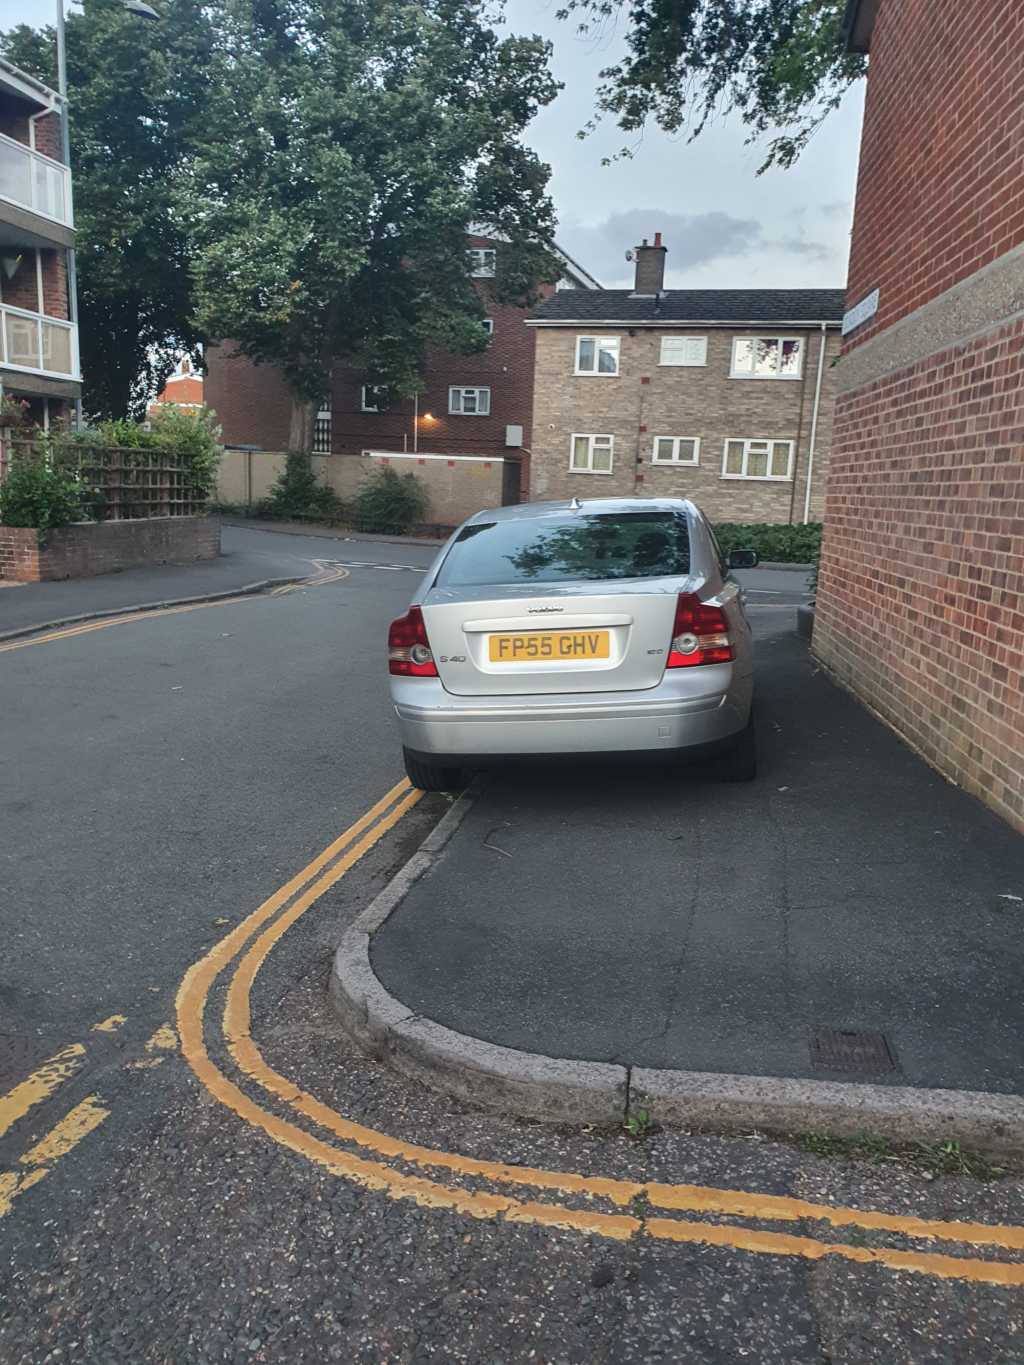 FP55 GHV displaying Inconsiderate Parking